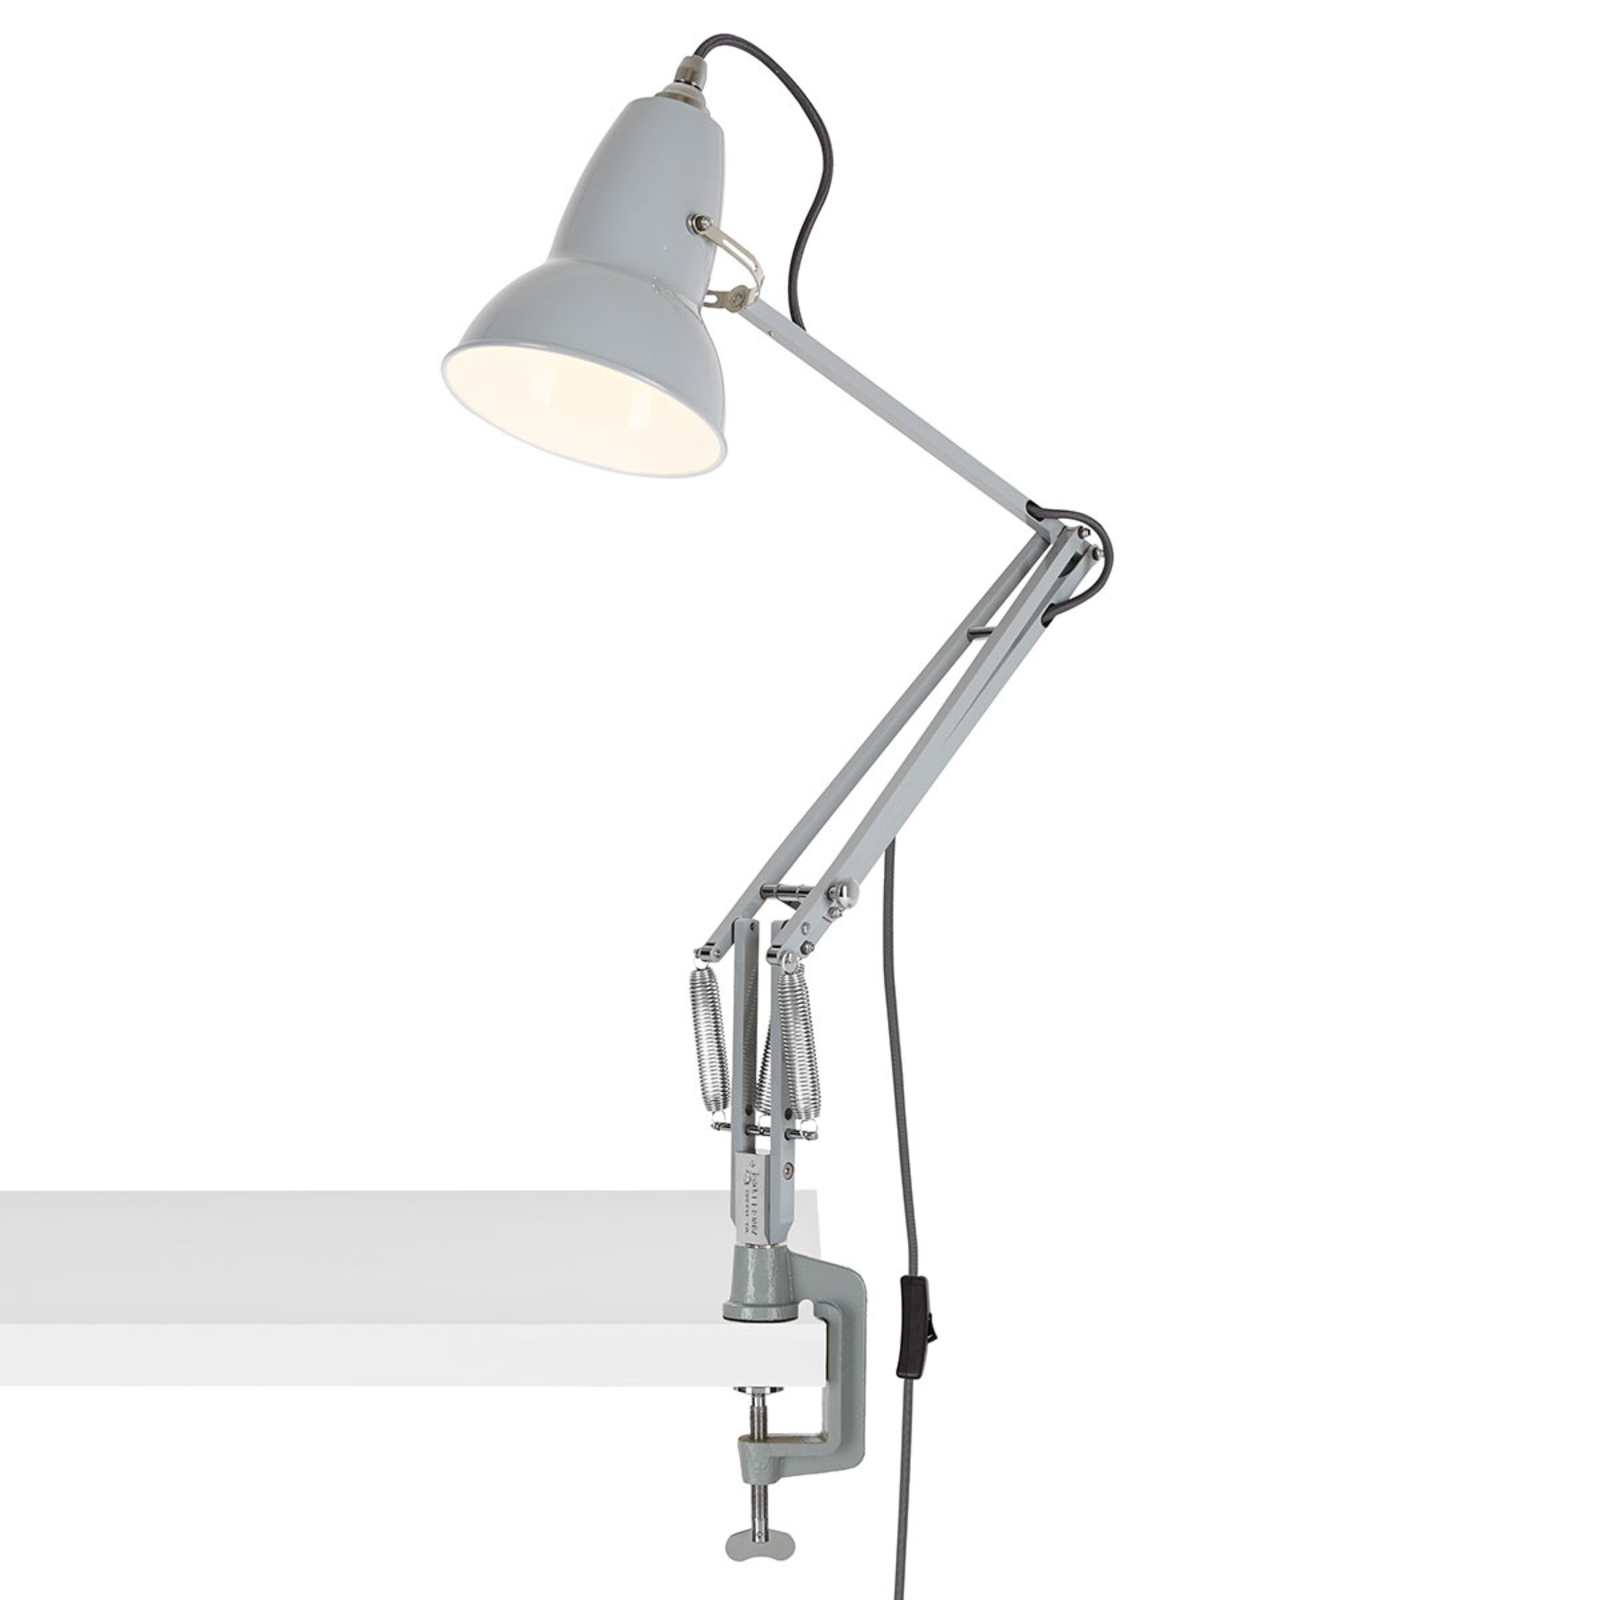 Anglepoise Original 1227 lampe à pince grise